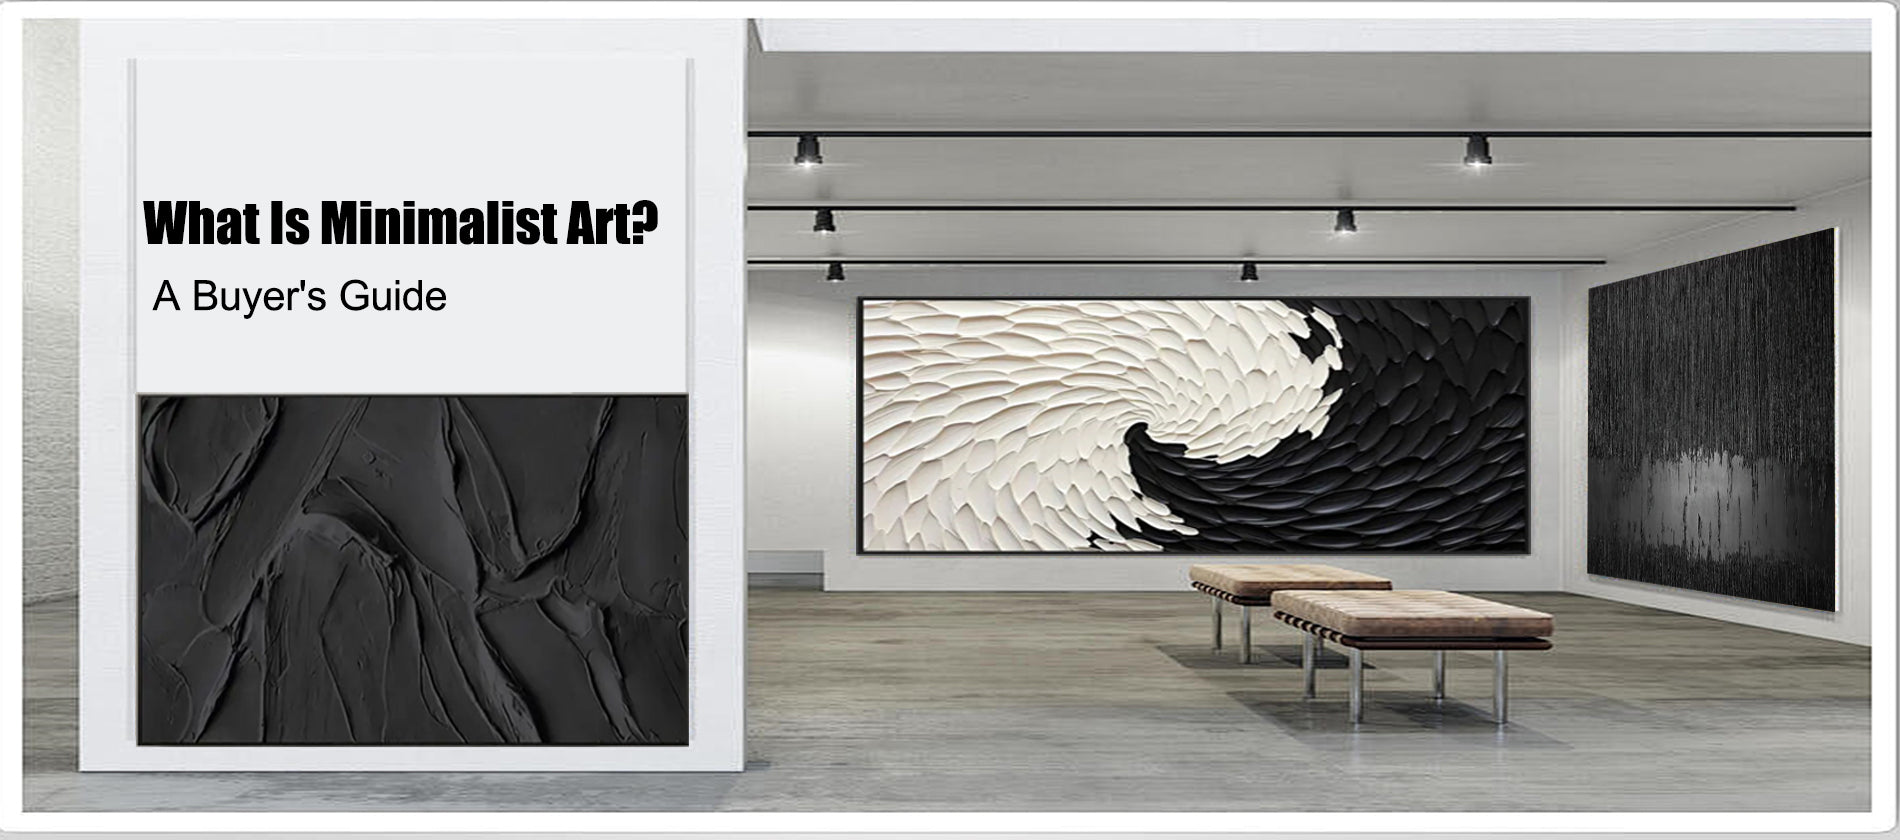 What Is Minimalist Art? A Buyer's Guide